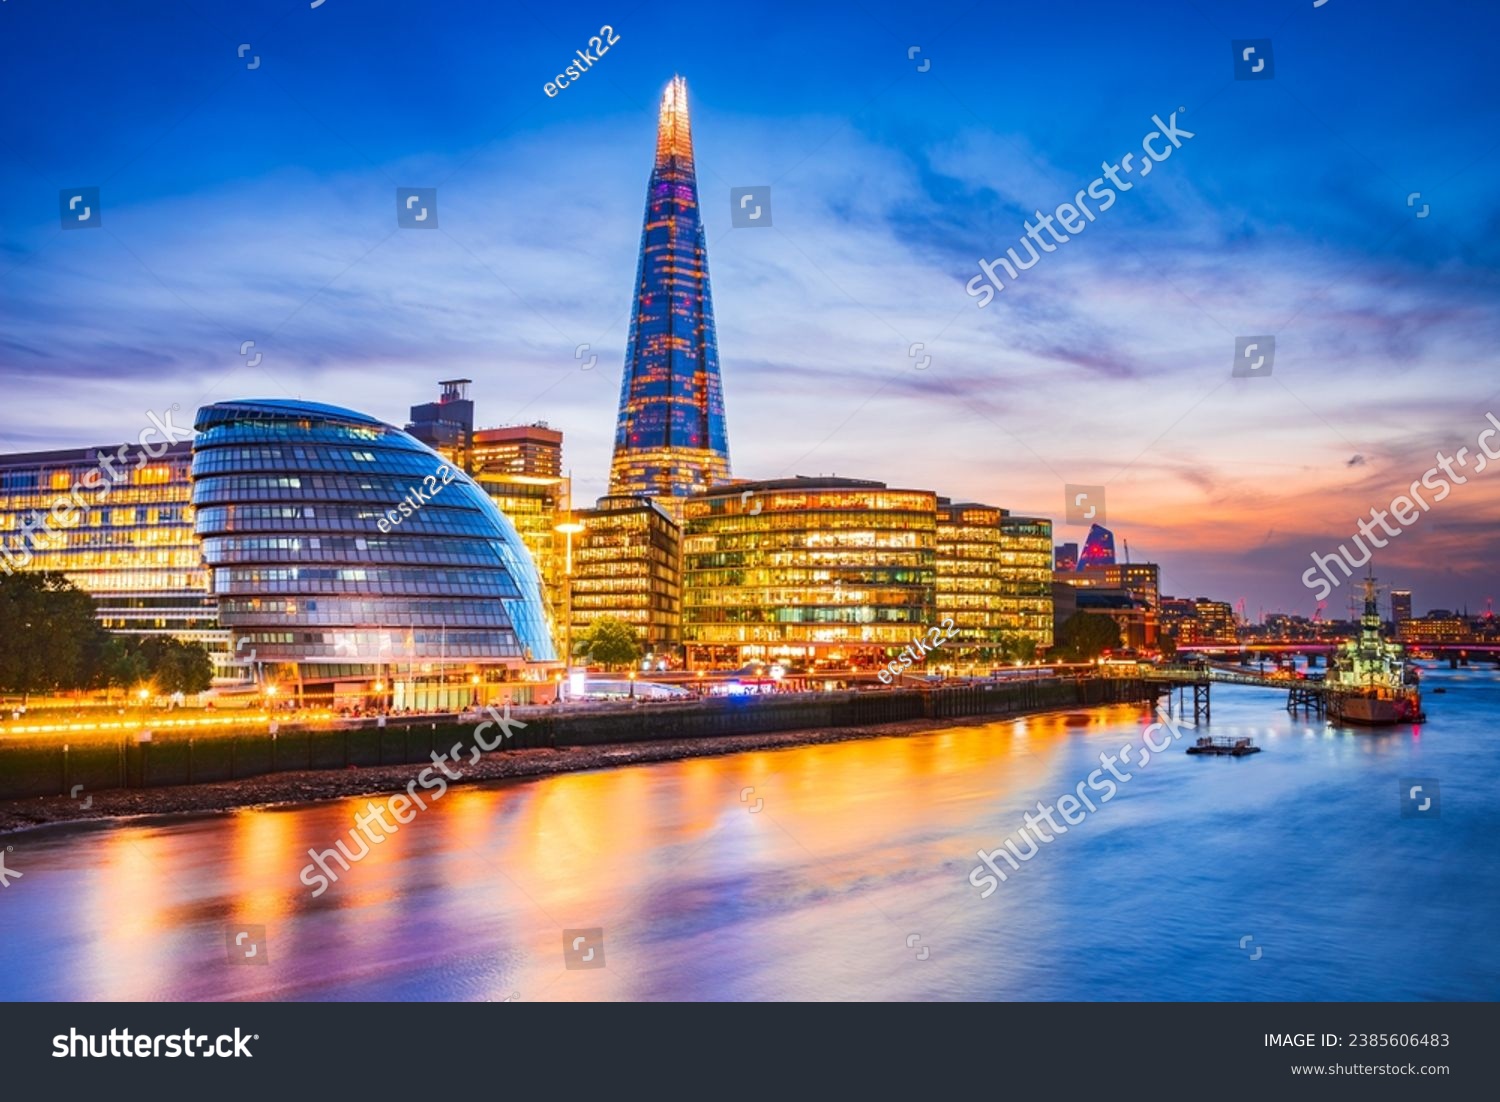 London, United Kingdom. Skyline view of the famous New London, City Hall and Shard, golden sunset hour. View includes Thames River, skyscrapers, office buildings and beautiful sky. #2385606483